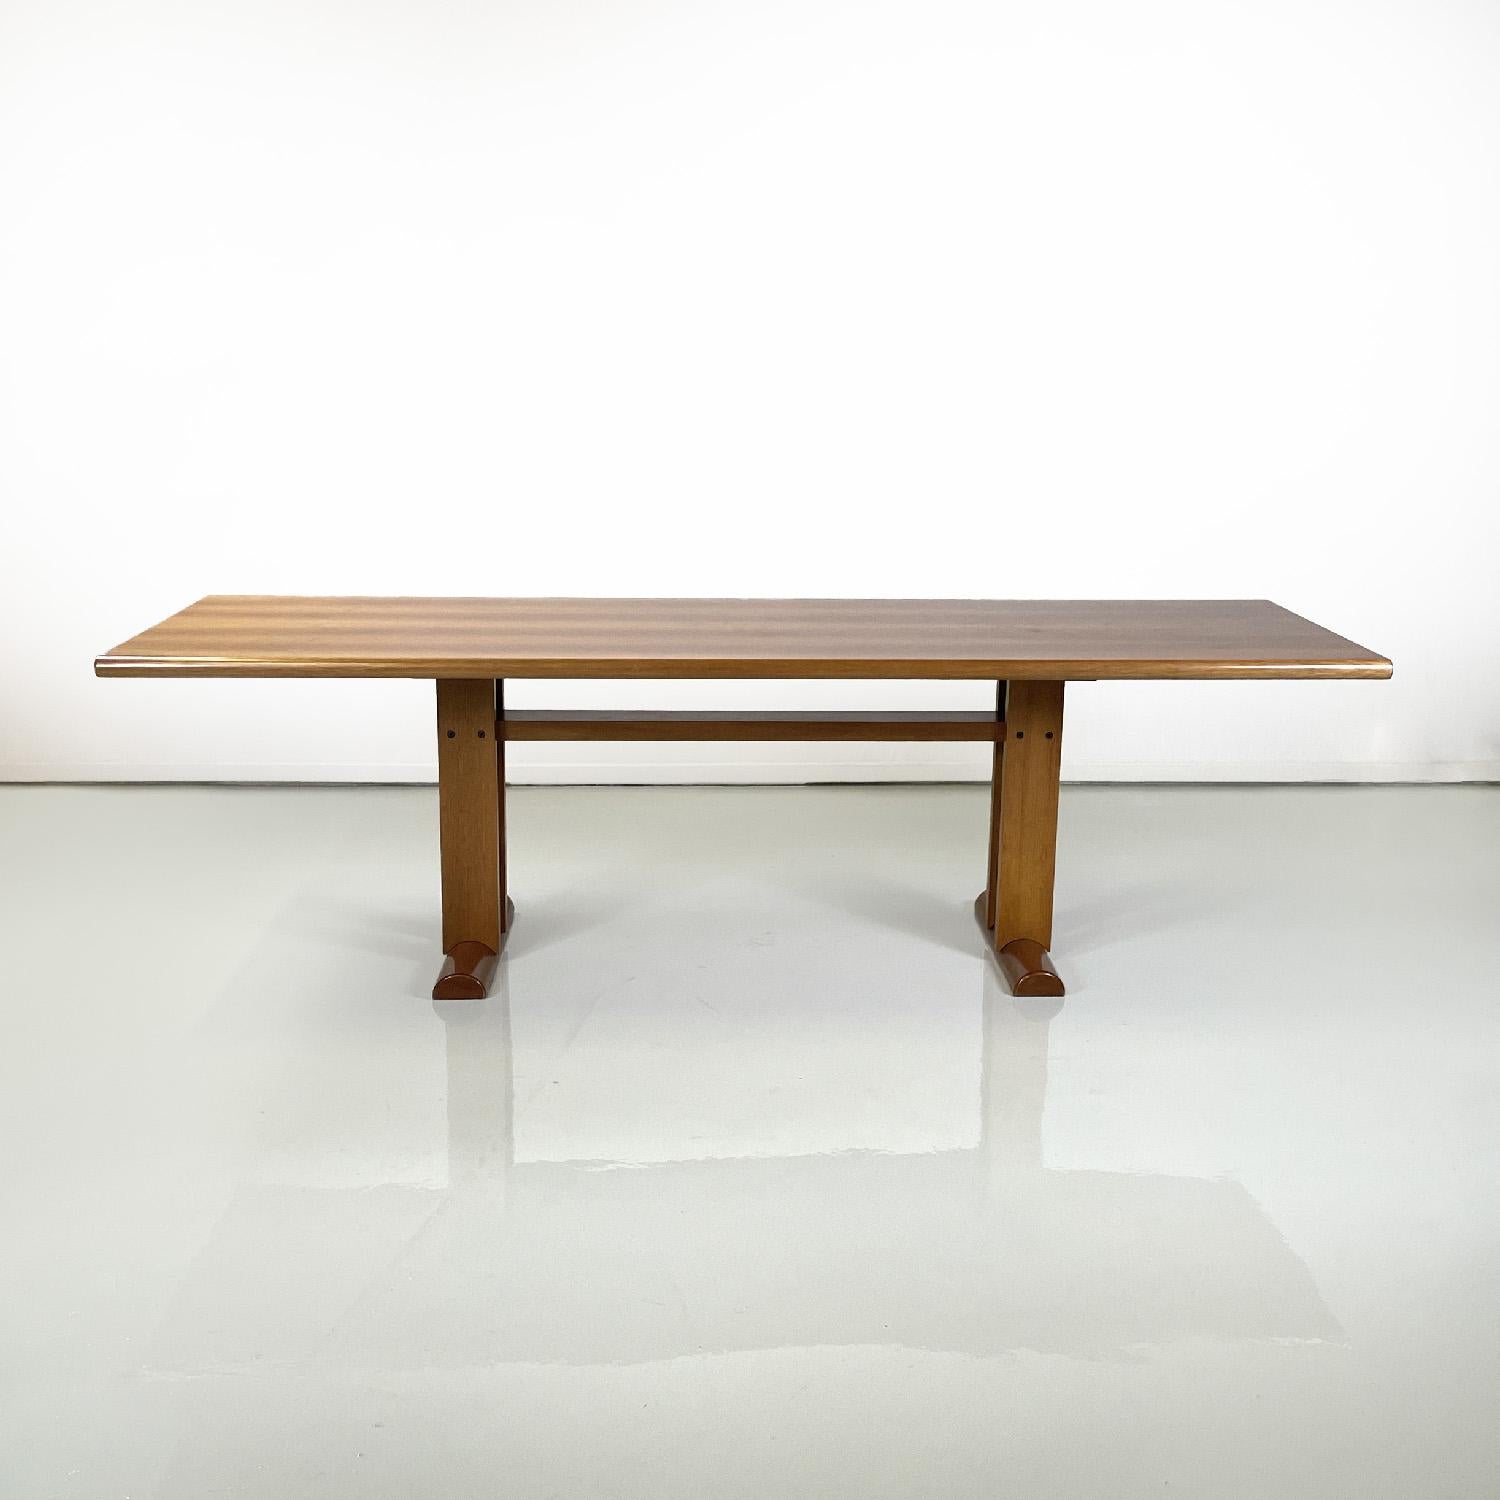 Italian modern rectangular wooden dining table, 1980s
Rectangular dining table made entirely of wood. The top has sides with a semicircular profile, the load-bearing structure is made up of four vertical strips and a crosspiece that joins them with